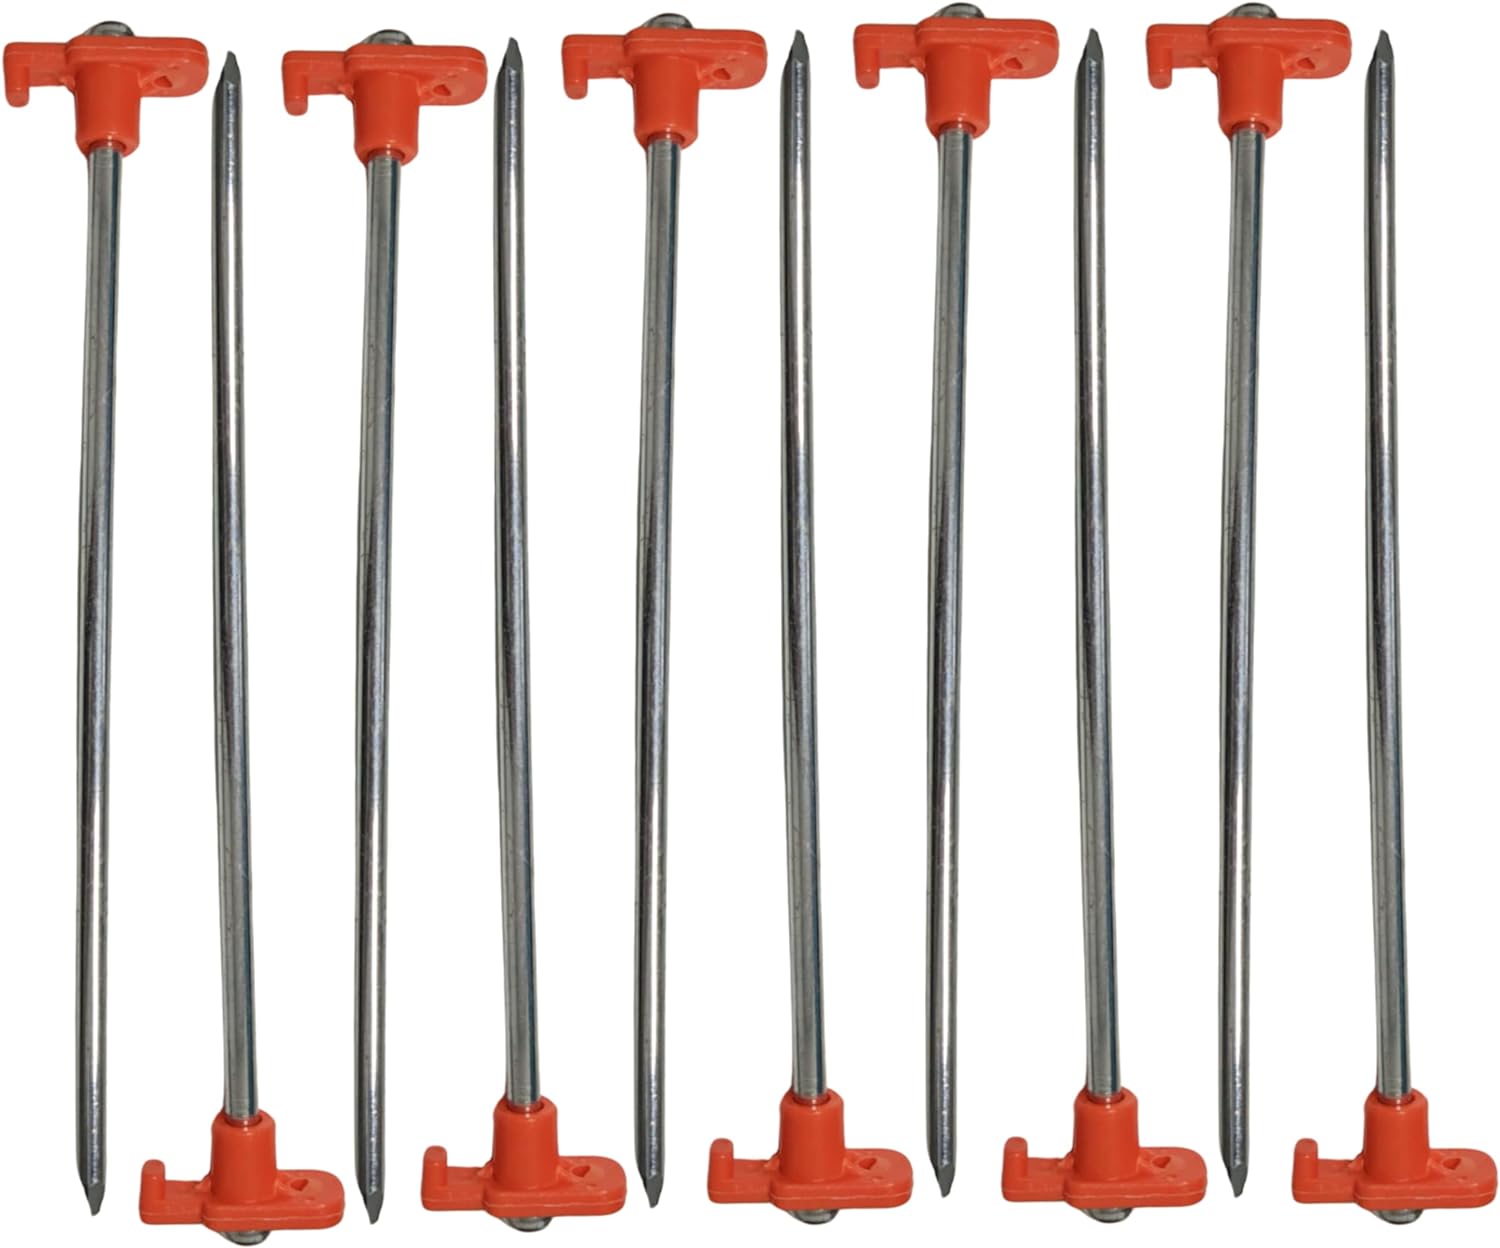 ADEPTNA Large Pack of 10 Galvanized Steel Rust Proof Tent Pegs – These Steel Hard Ground Pegs are Ideal for a Hard And Rocky Ground